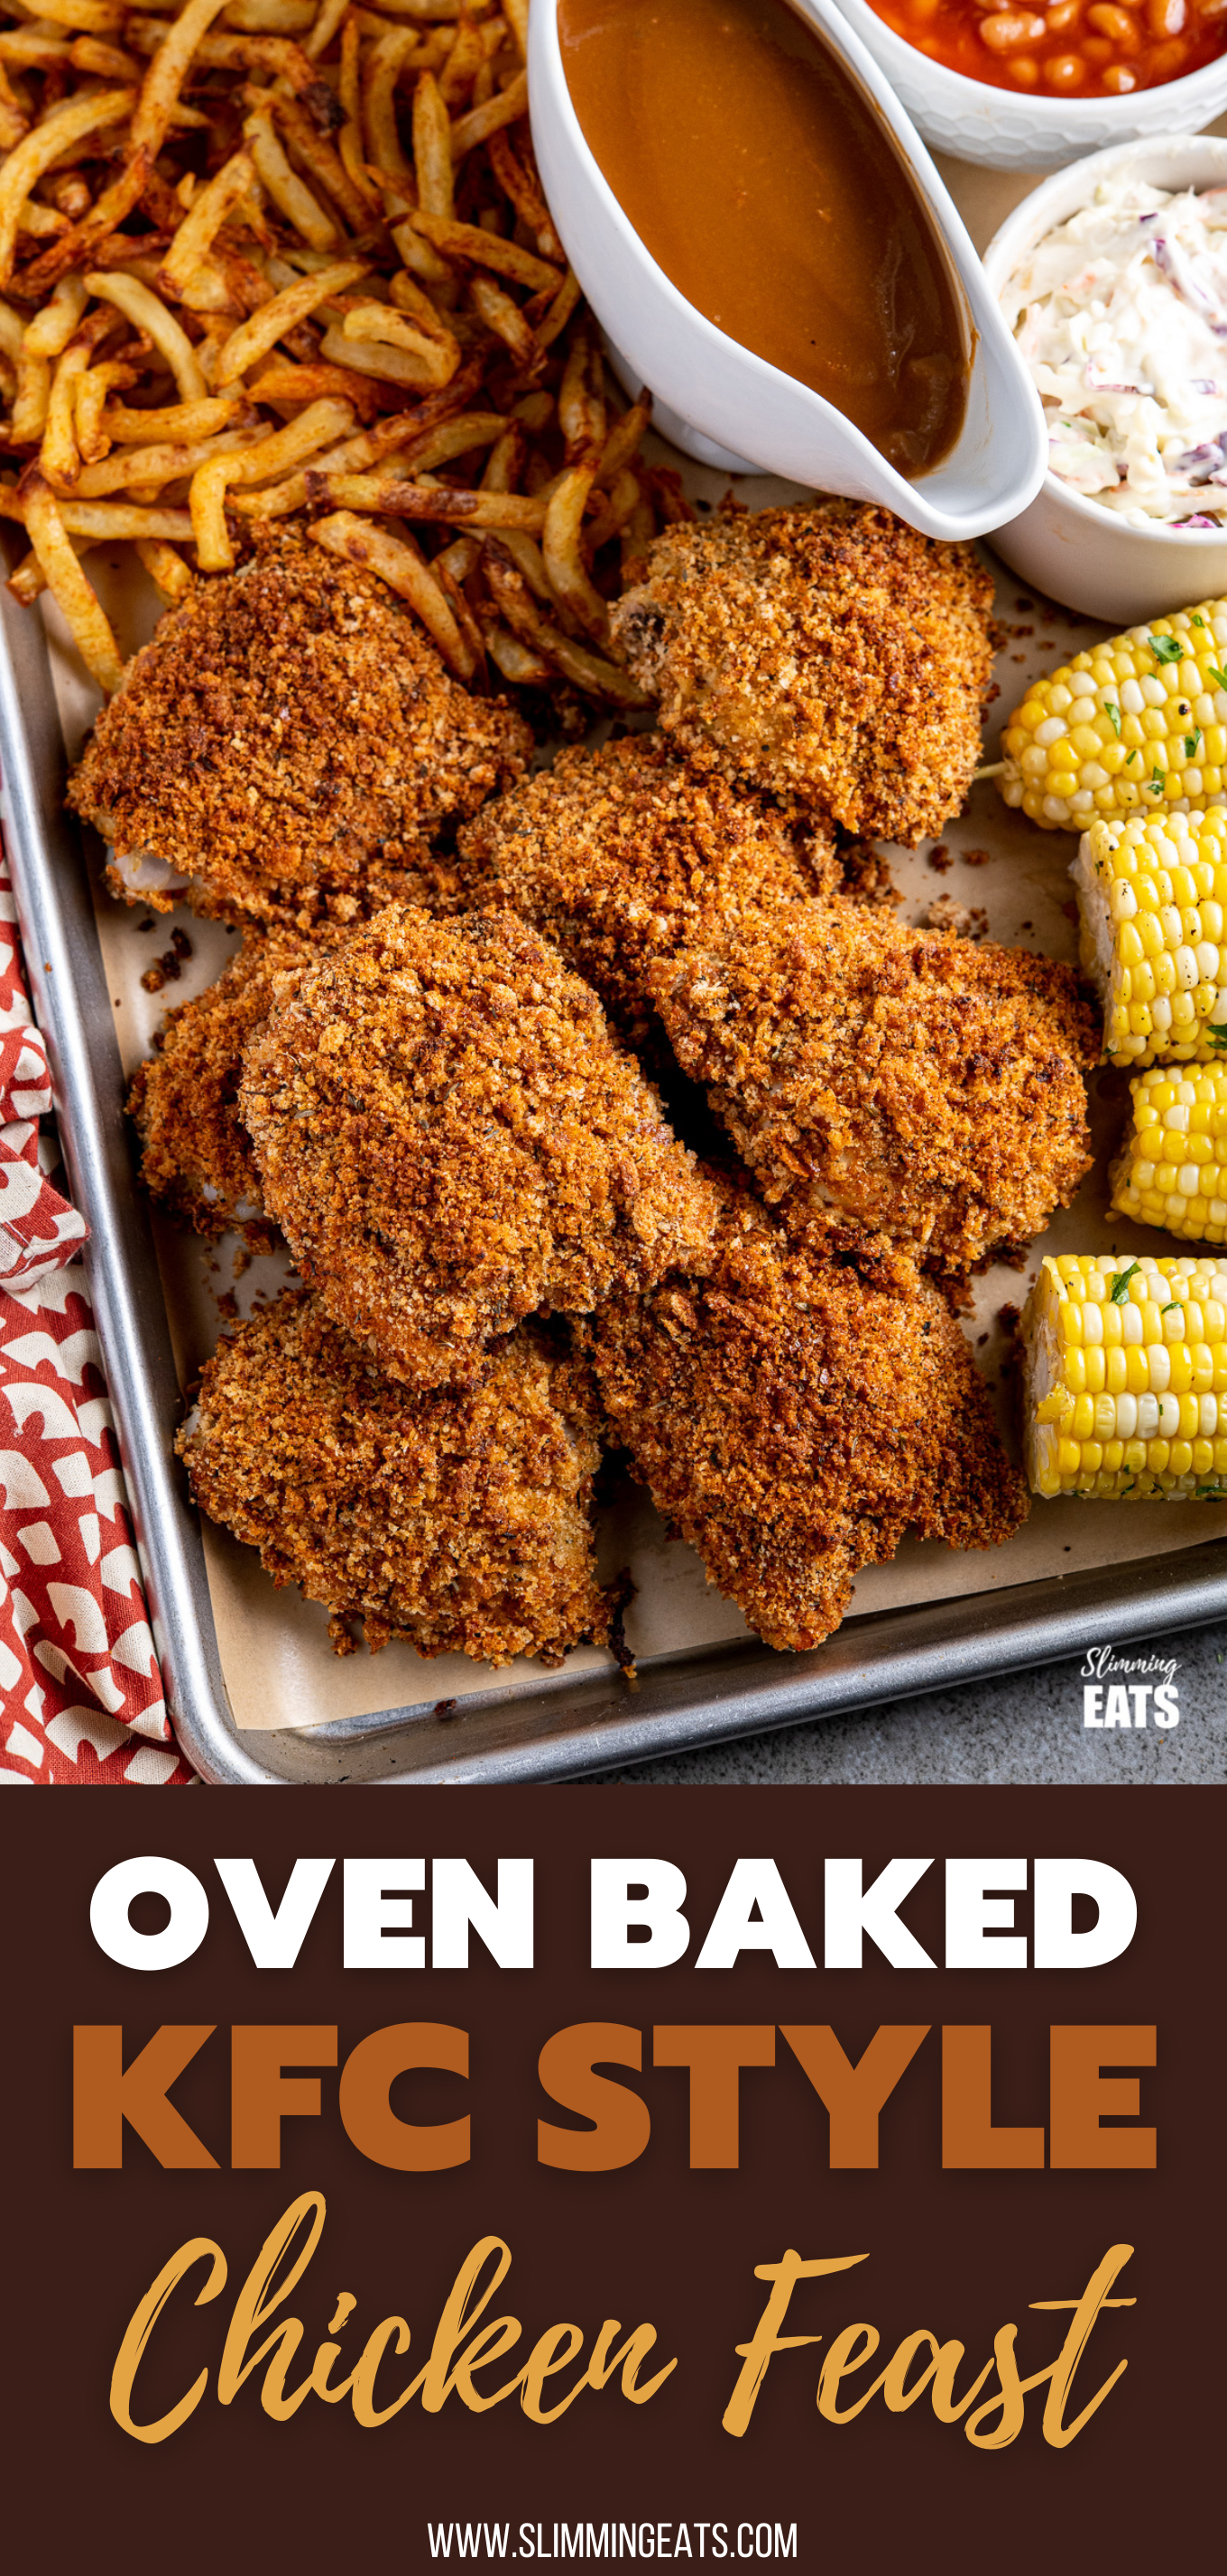 kfc chicken on parchment lined baking tray with sides (fries, beans, coleslaw and corn)